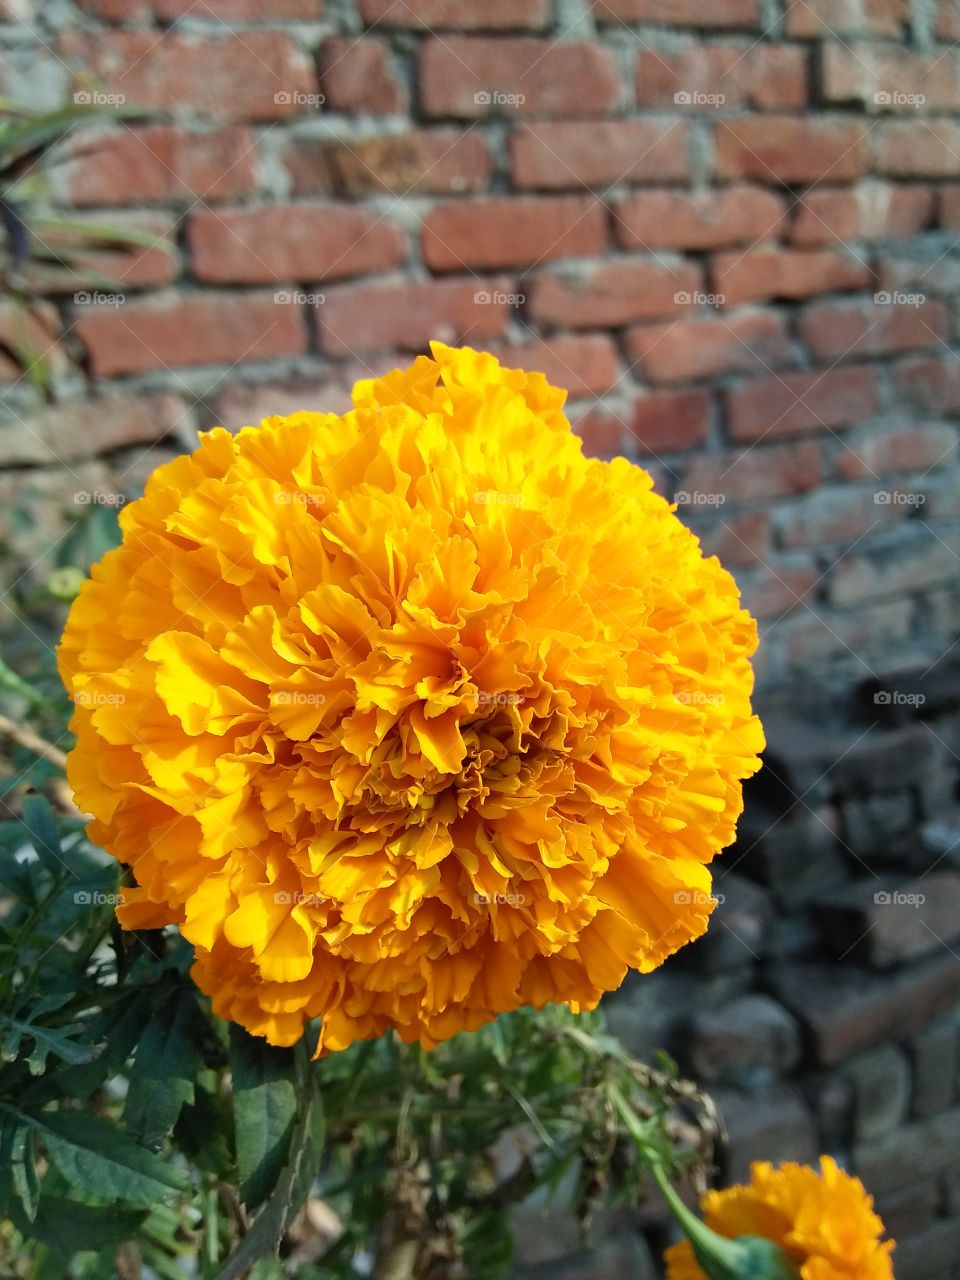 Fully grown Marigold flower beautifully captured from smartphone